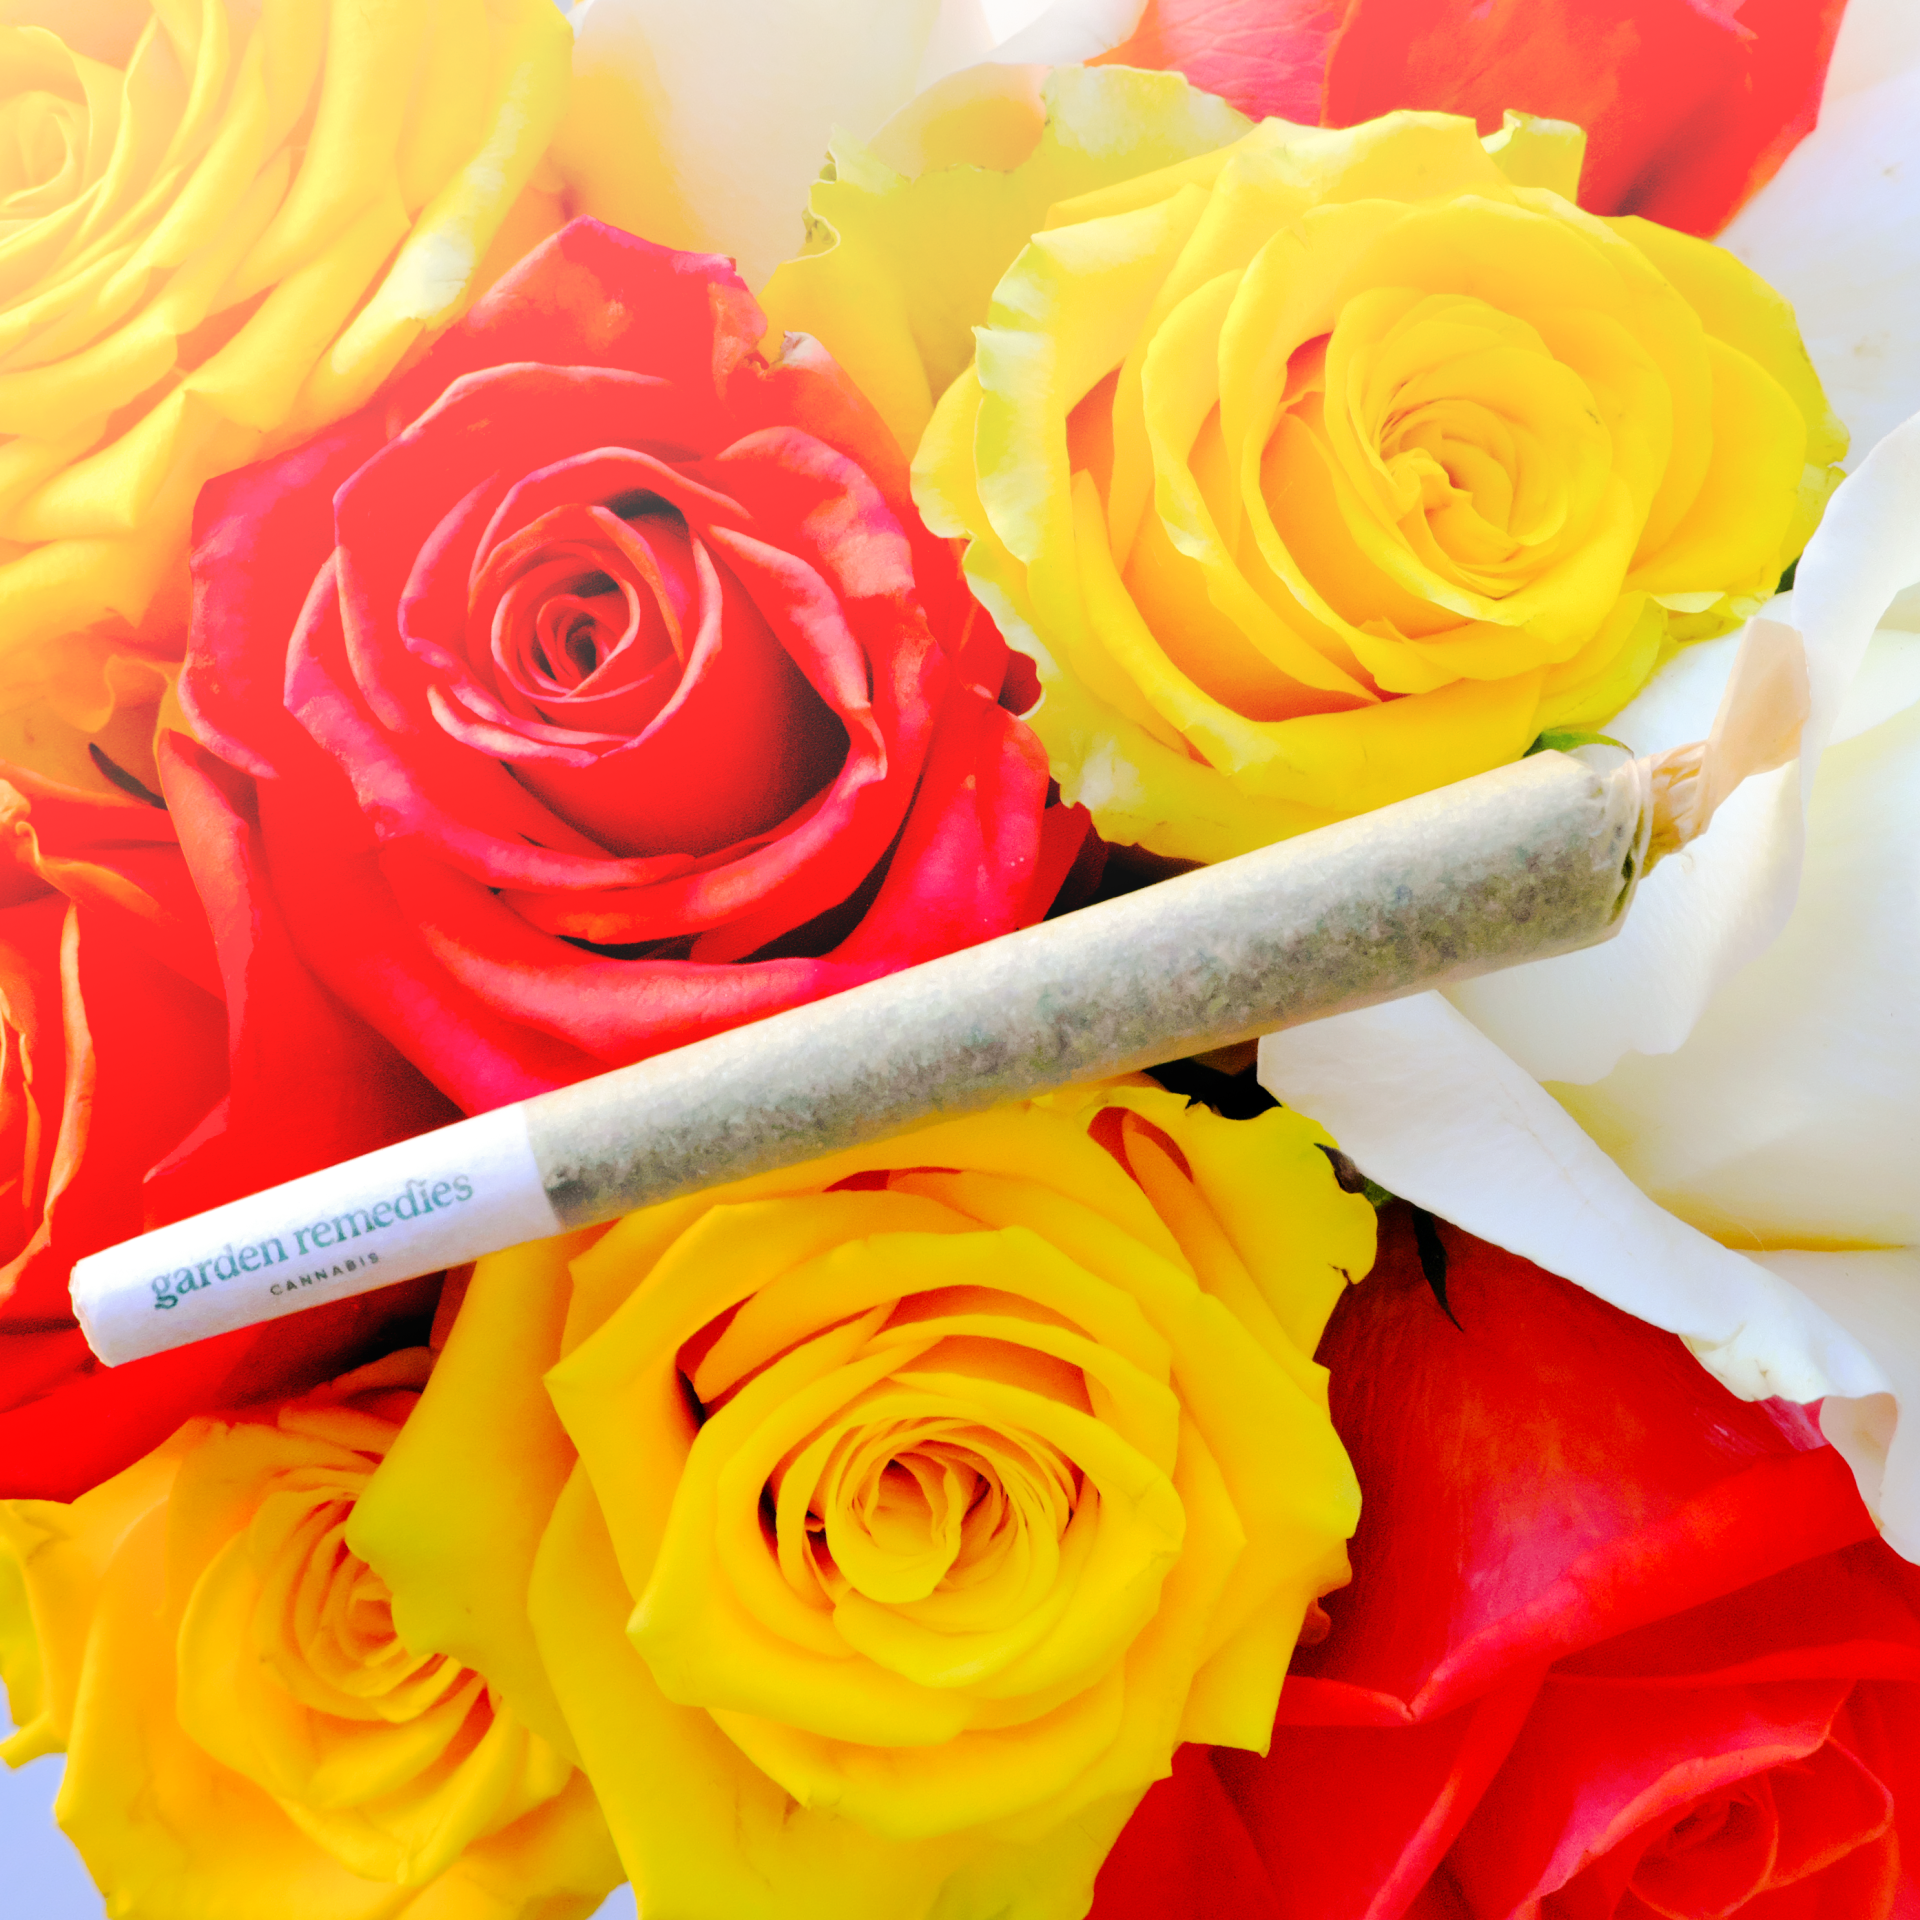 Pre-Roll joint in front of roses